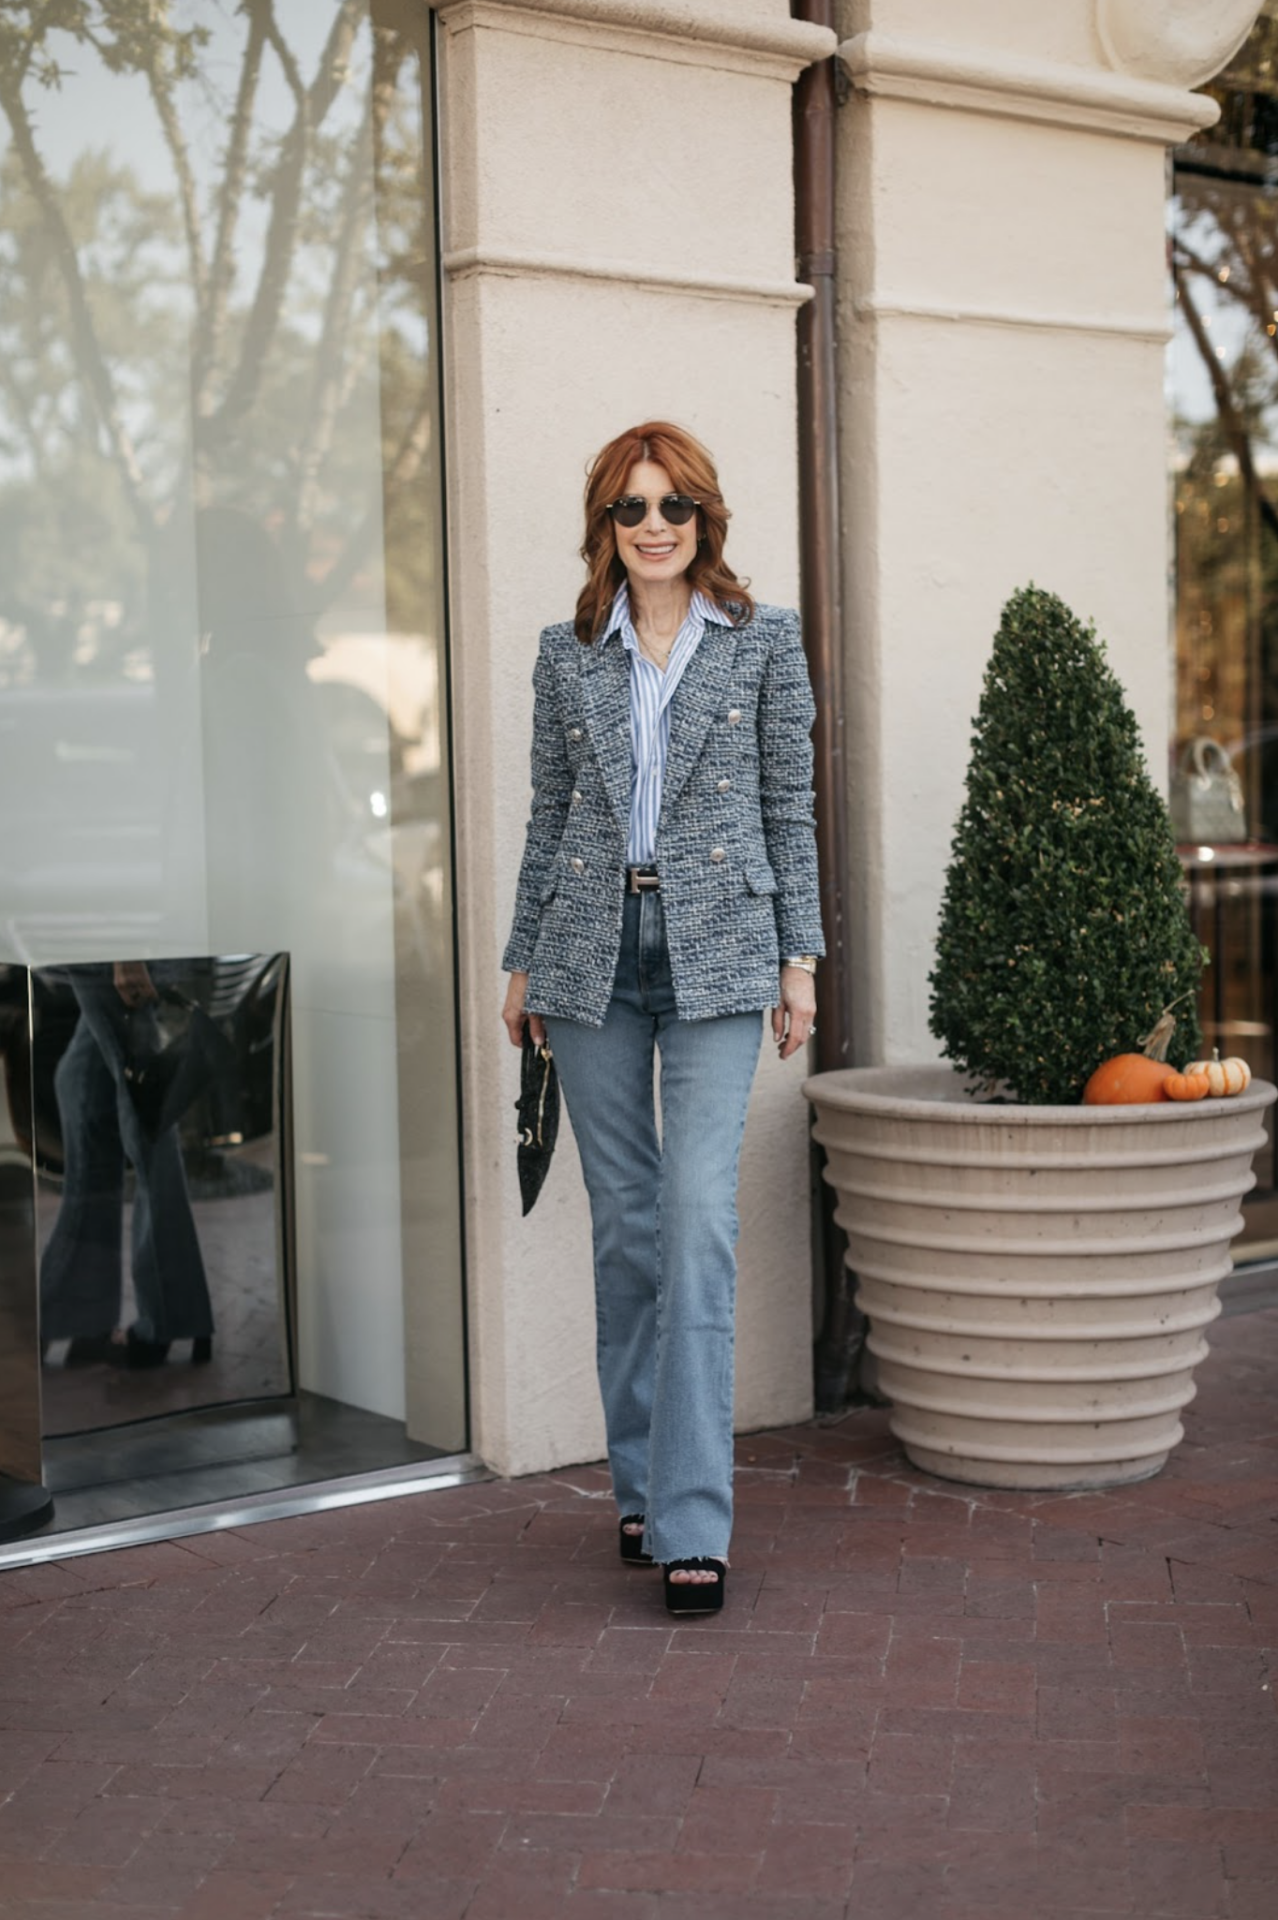 How to elevate a denim look, how to dress up jeans, what to wear with jeans over 40, how to style a blazer with jeans, how to wear a blazer with jeans, beautiful blazers, blazers for fall, blazers for winter, Cathy Williamson, the middle page blog, Erin Busbee, fashion blogger over 40, Busbee style